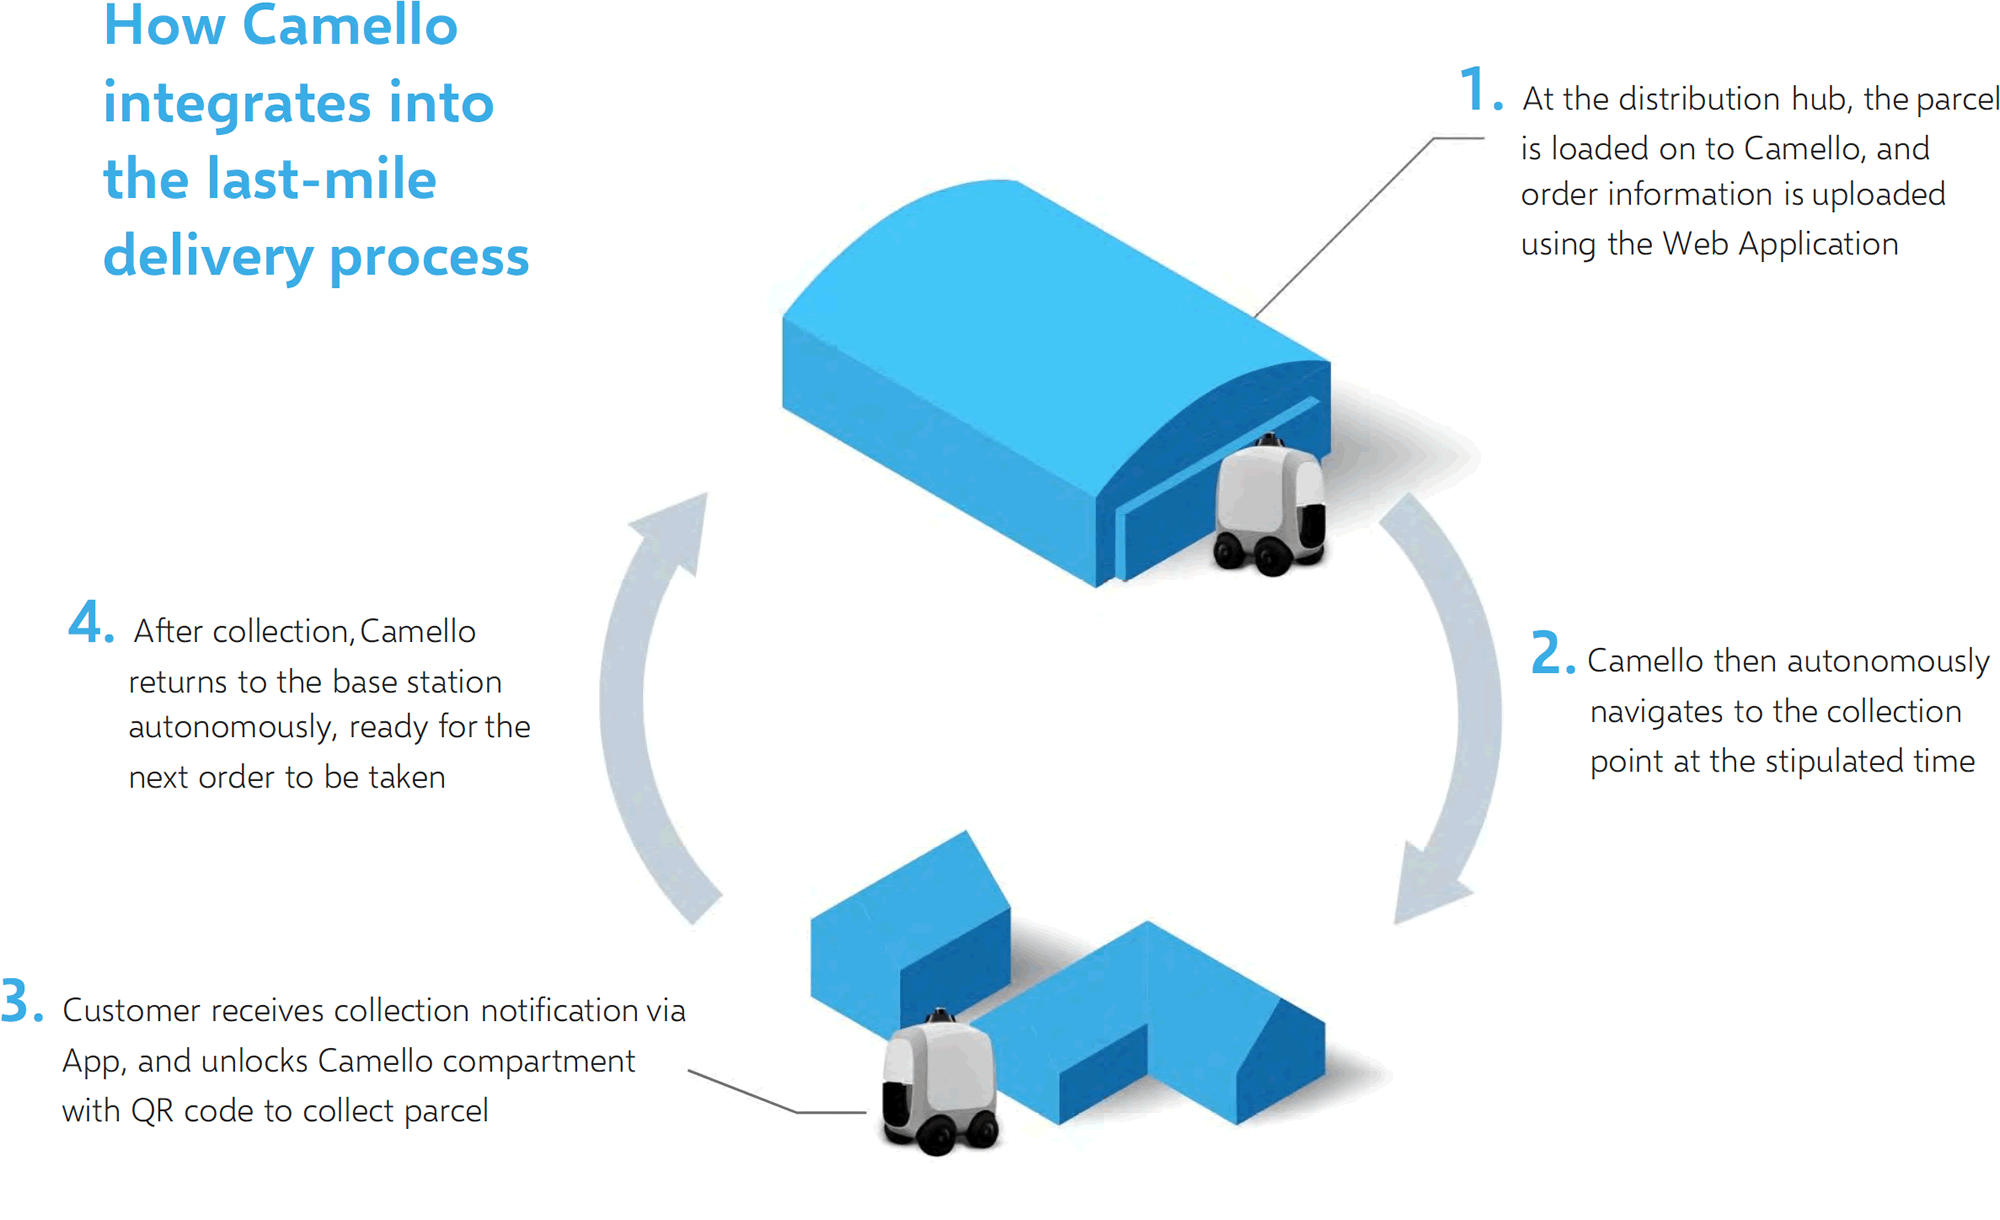 How Camello integrates into the delivery process